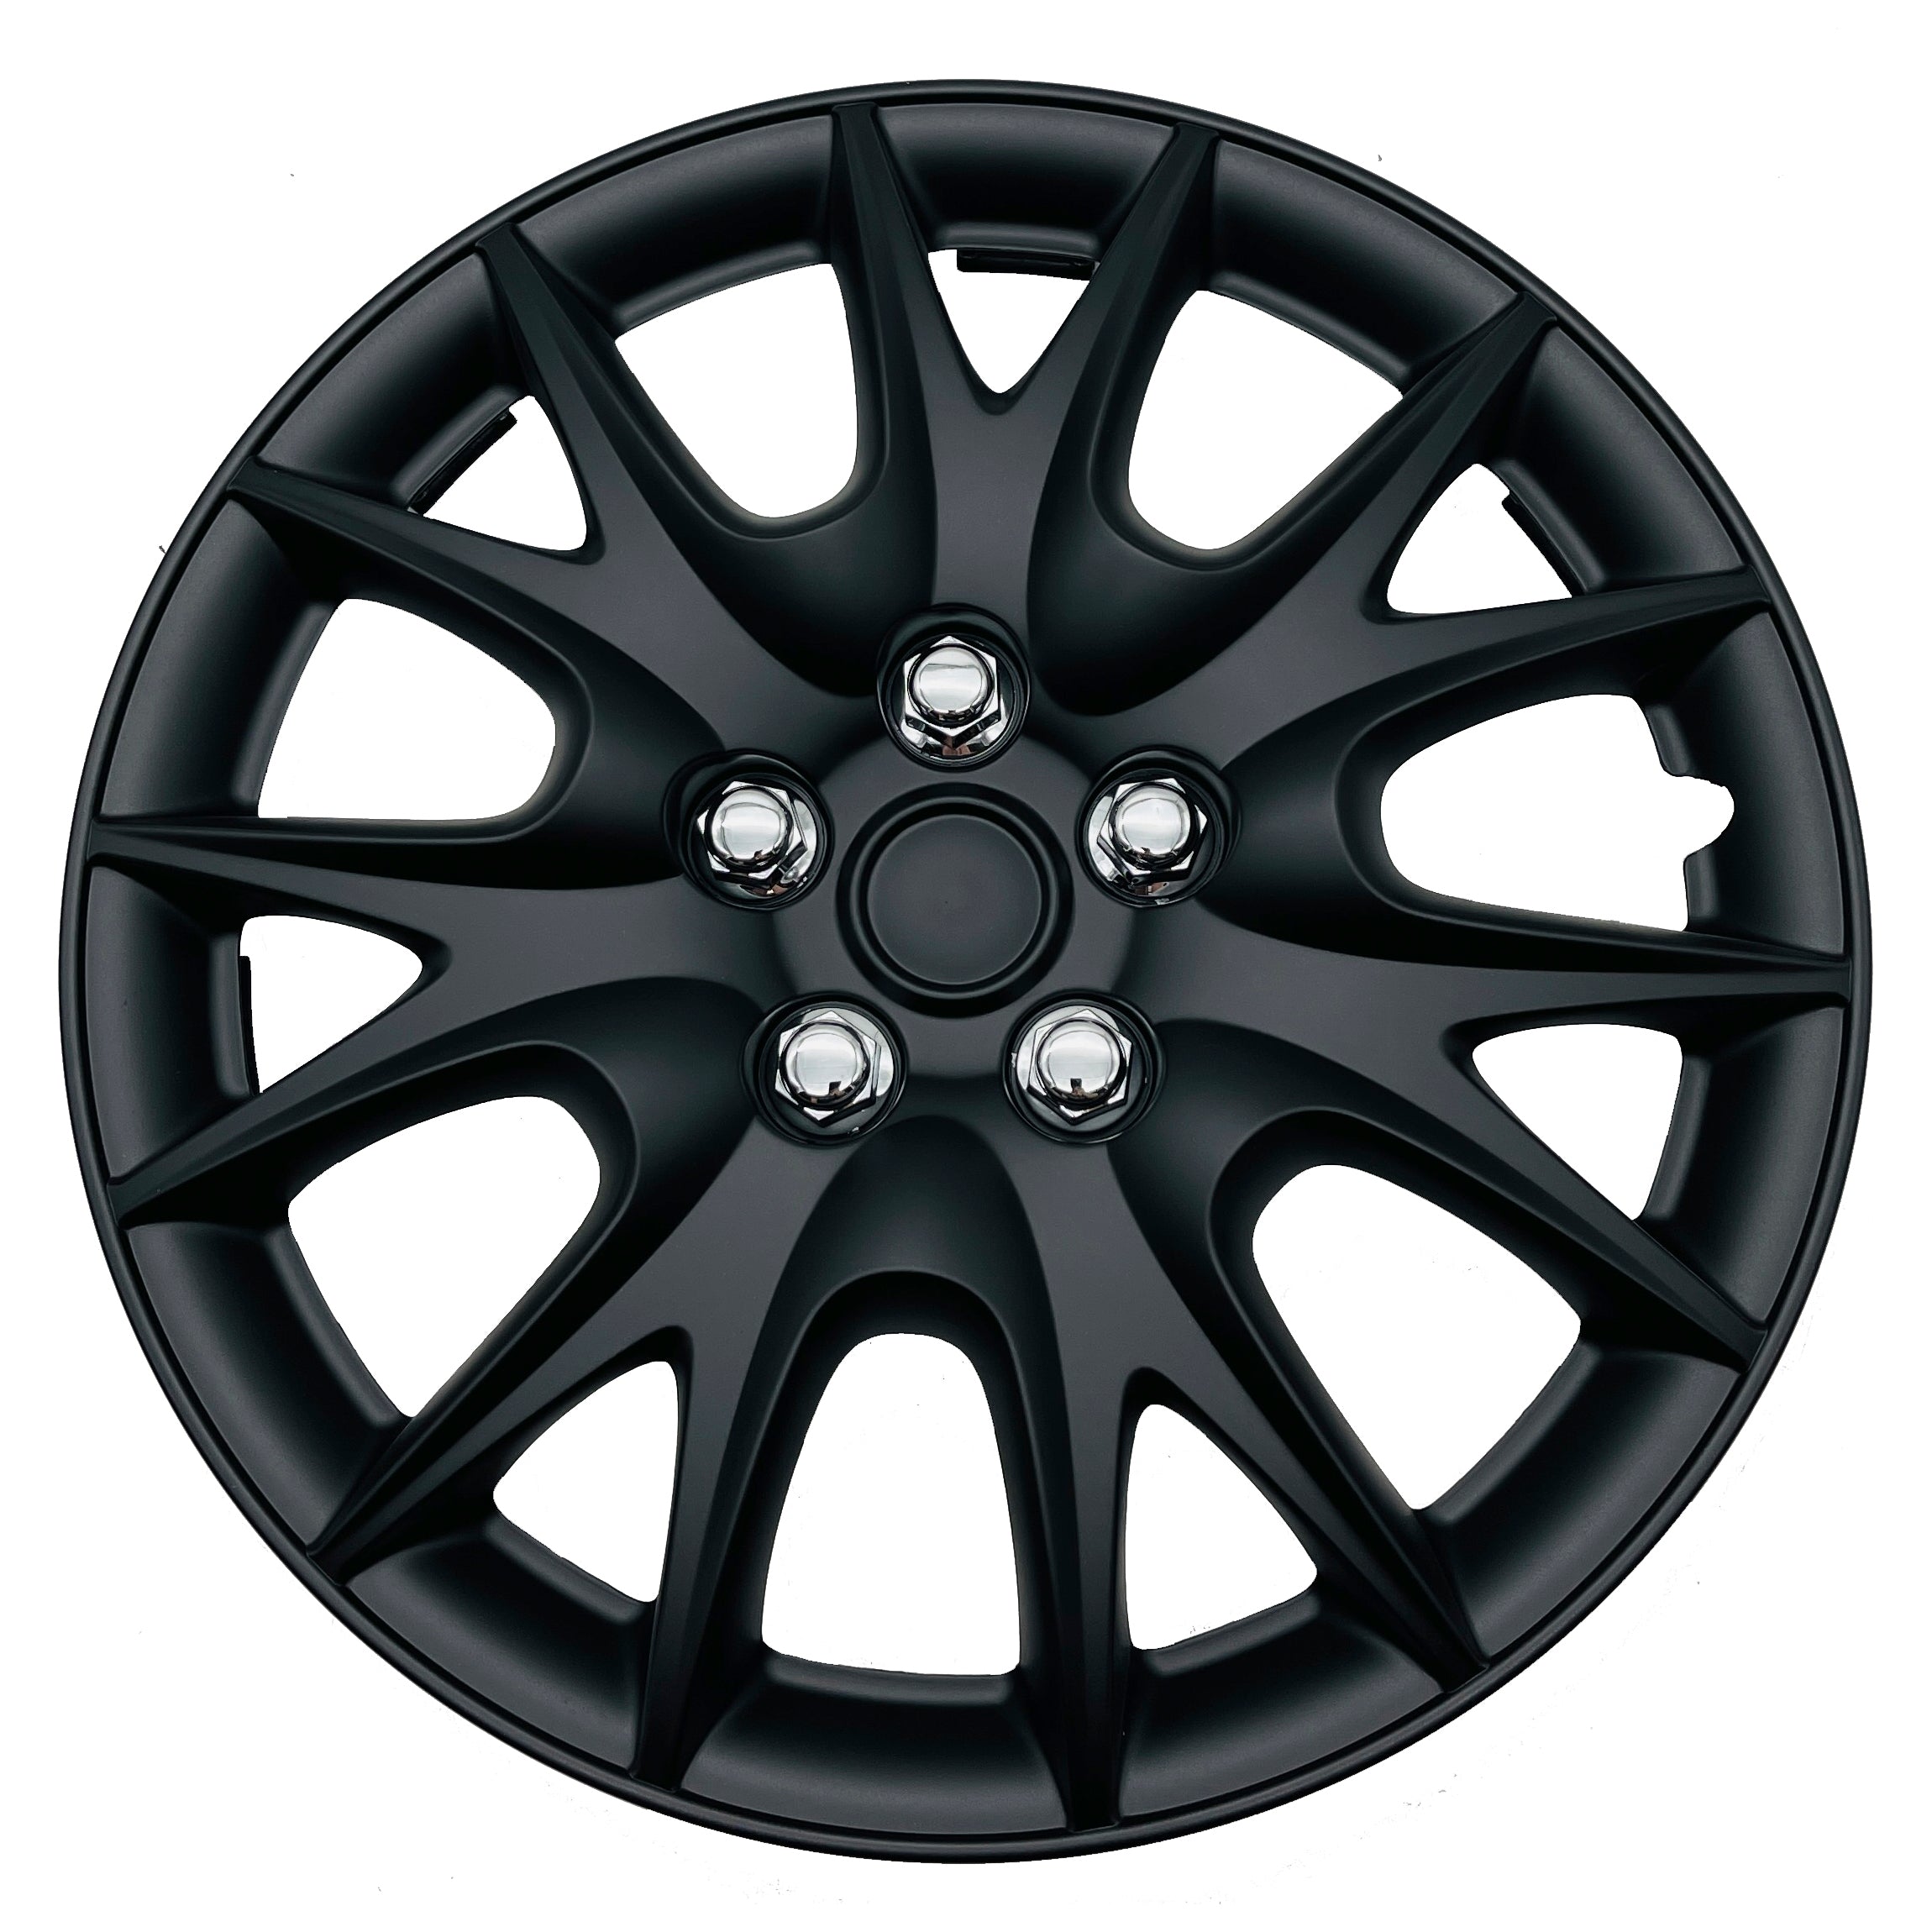 MWC 446521 Hubcaps Wheel Covers 15 inch 4 Set Matte-Black